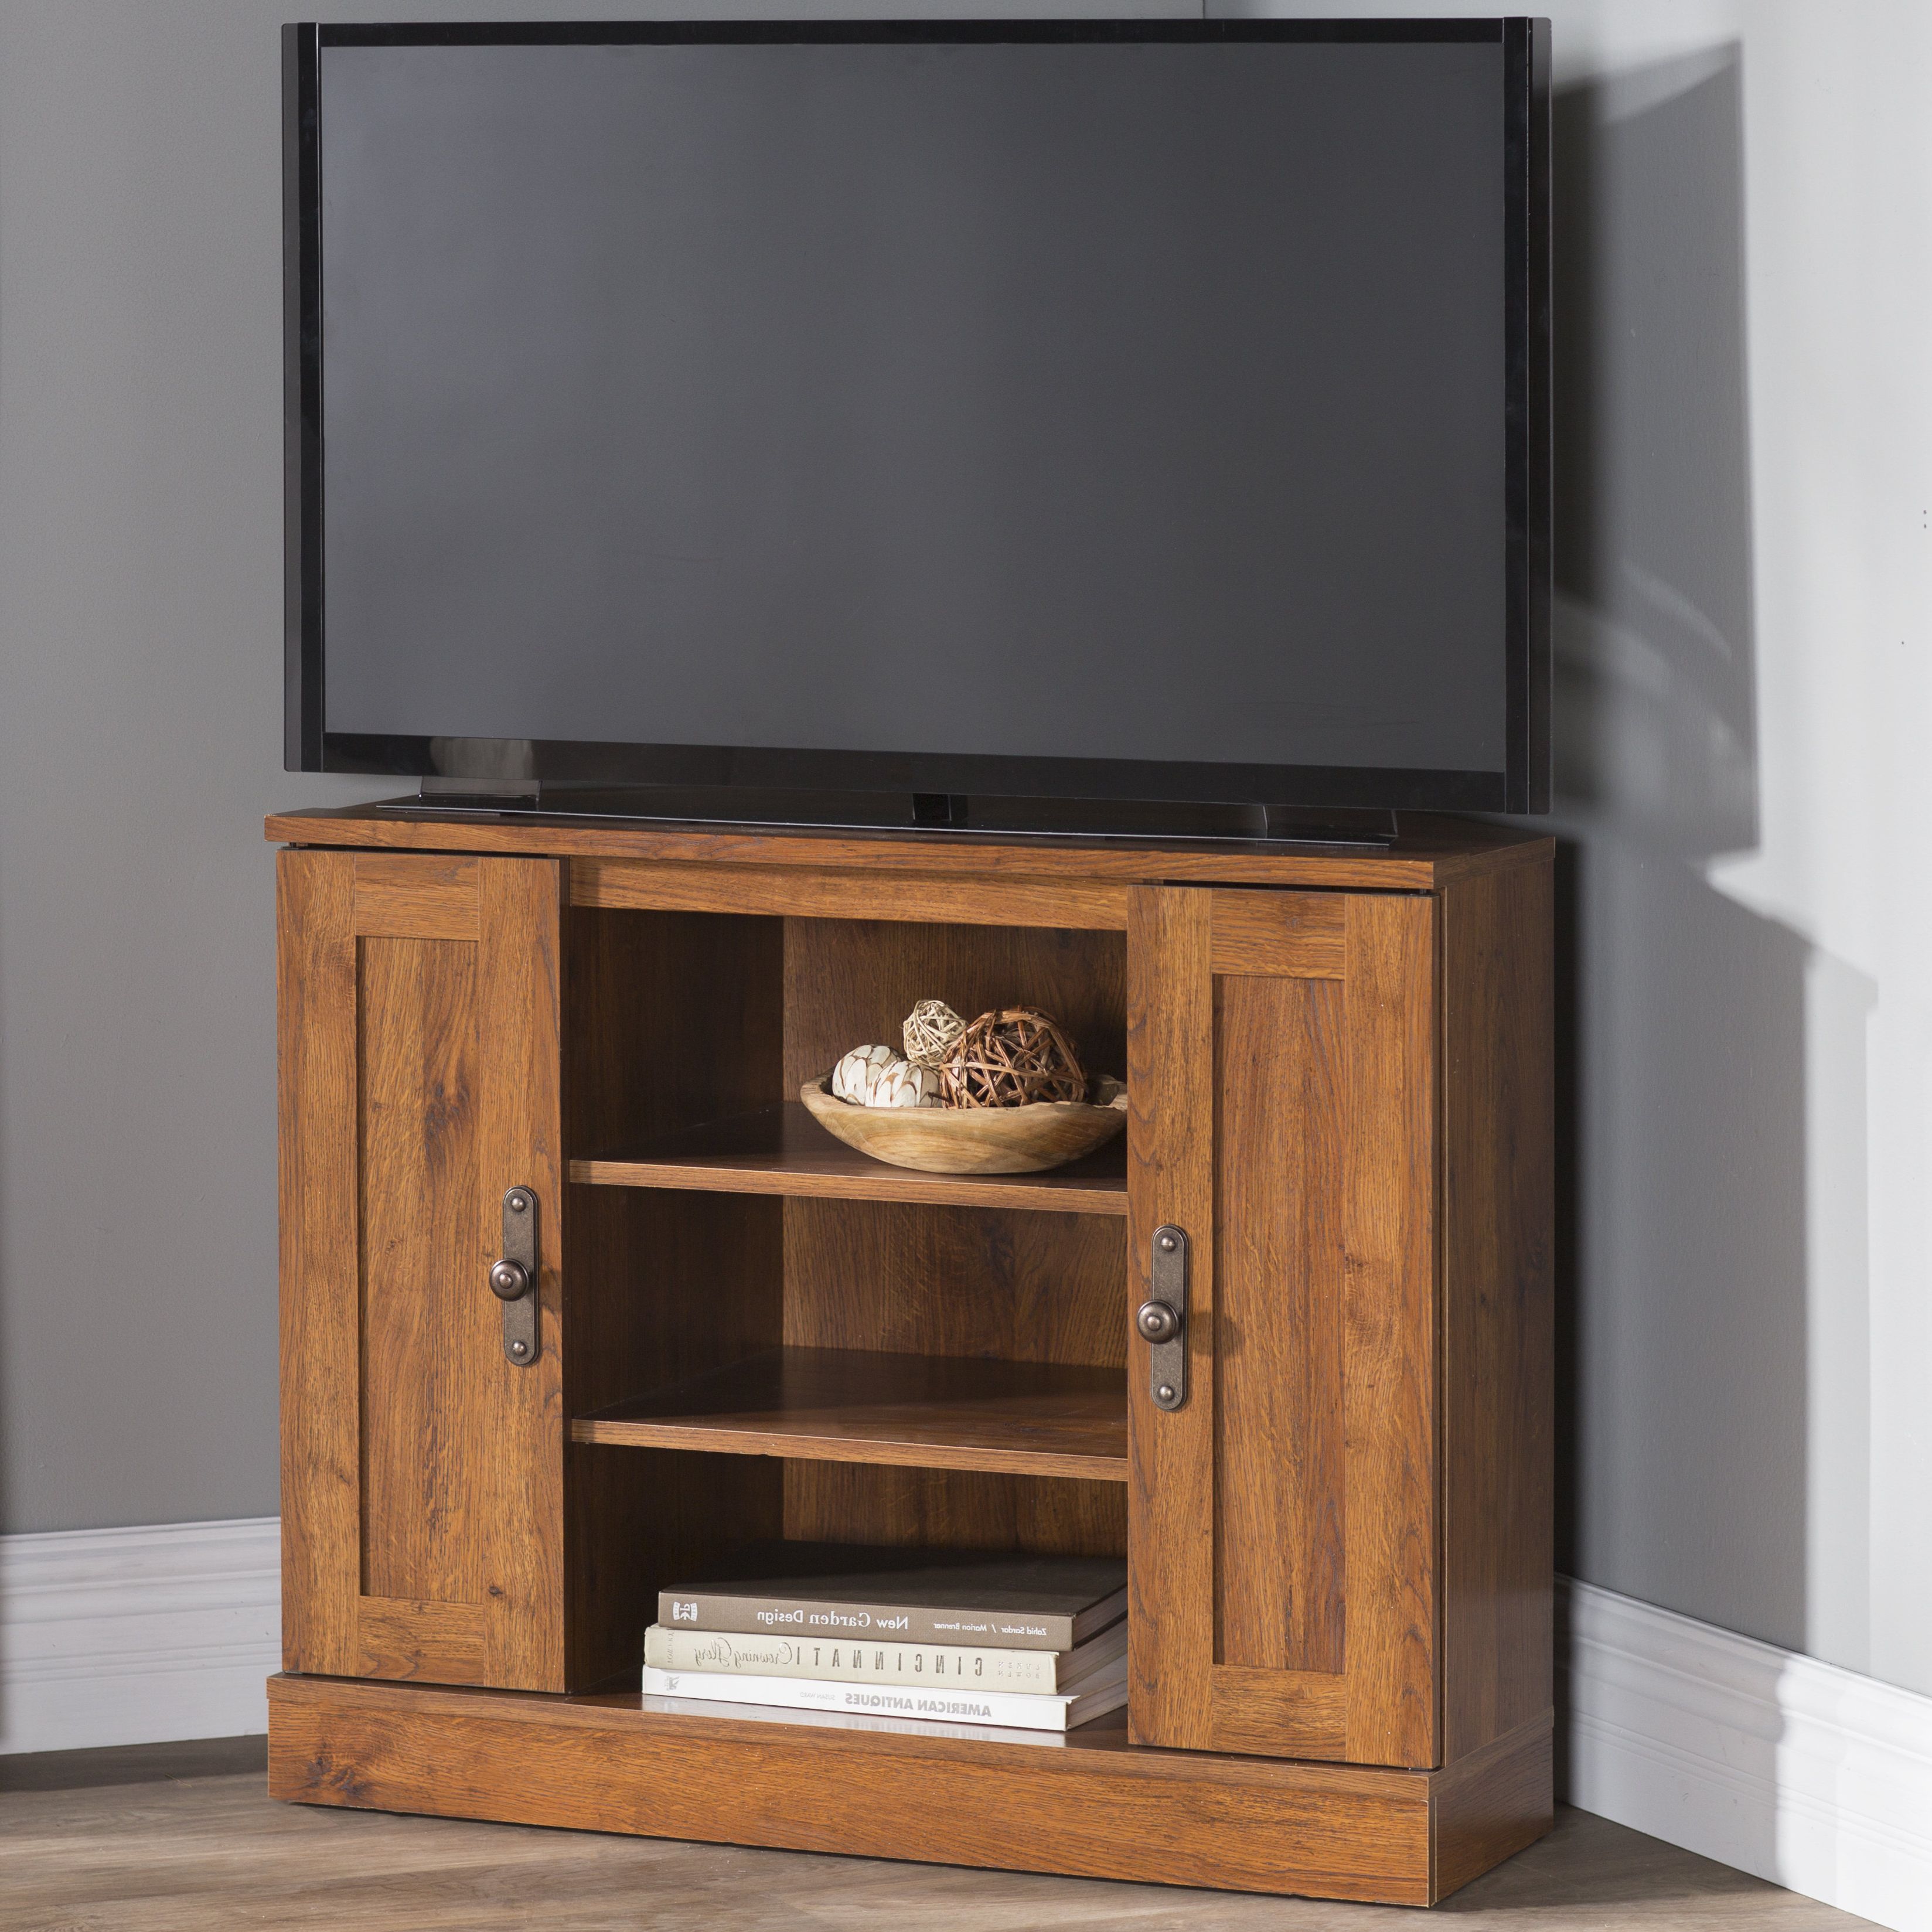 Preferred Unique Corner Tv Stands In Alcott Hill Englewood Corner Tv Stand For Tvs Up To 37" & Reviews (View 4 of 20)